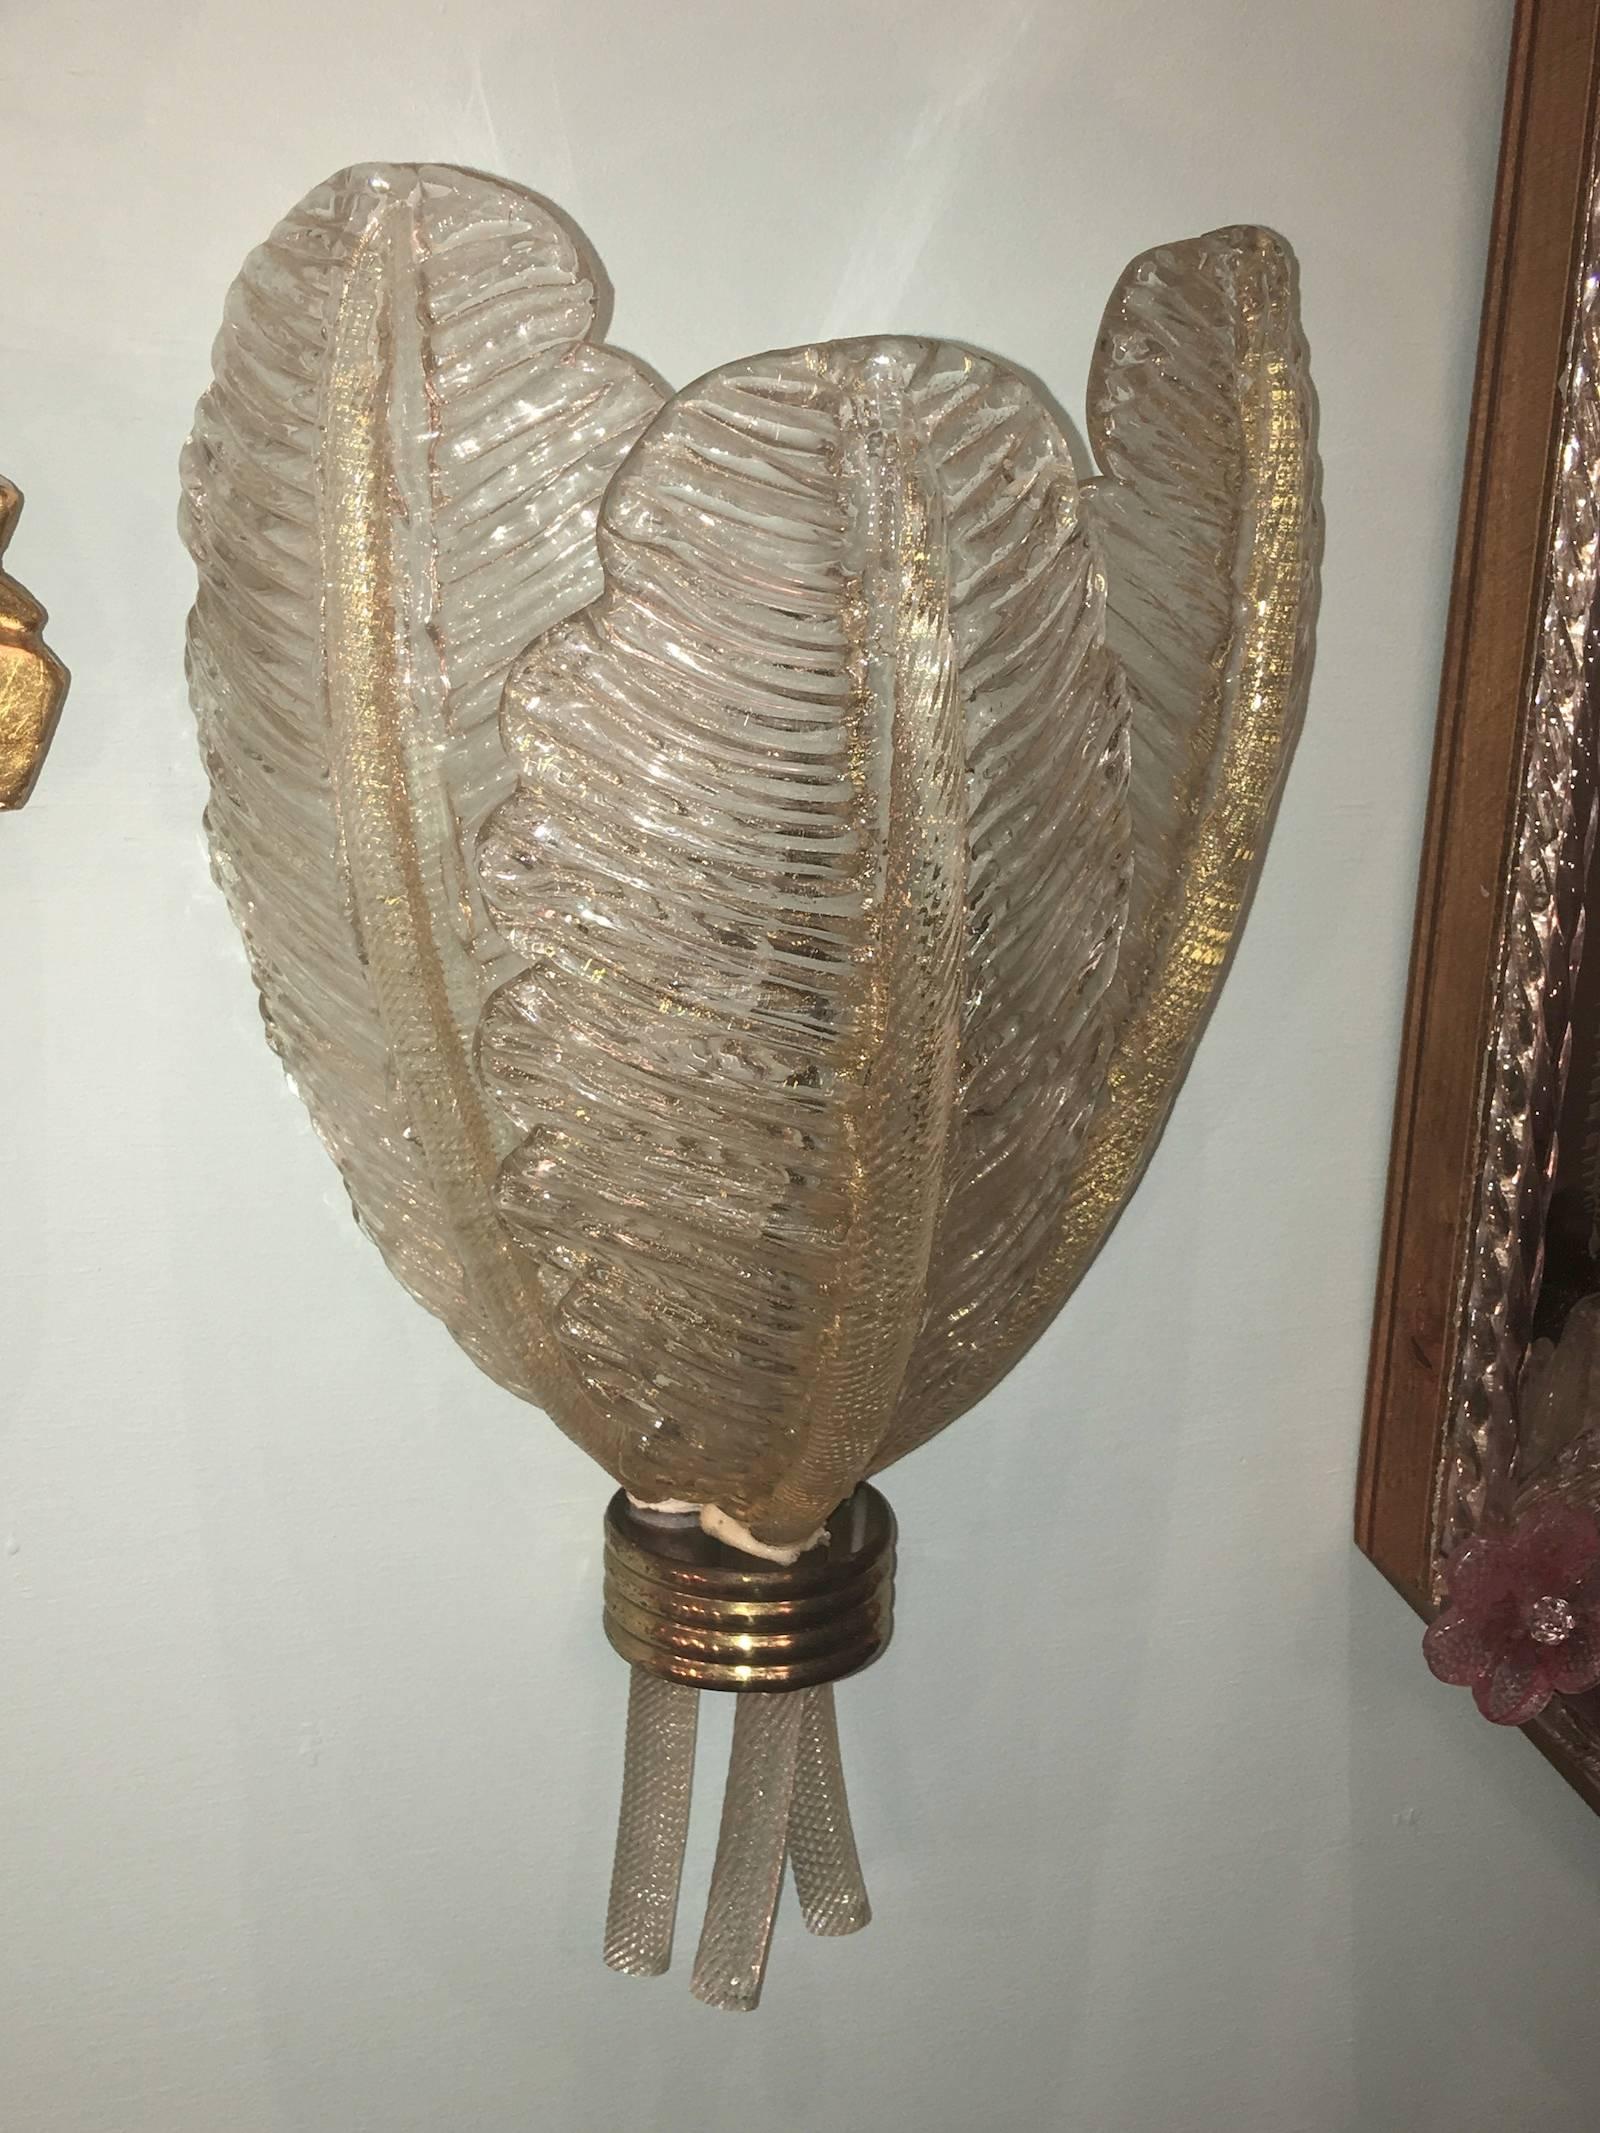 A beautiful single Murano glass sconce in feathers form. This Fixture requires one European E 14 candelabra bulb, up to 40 watts.